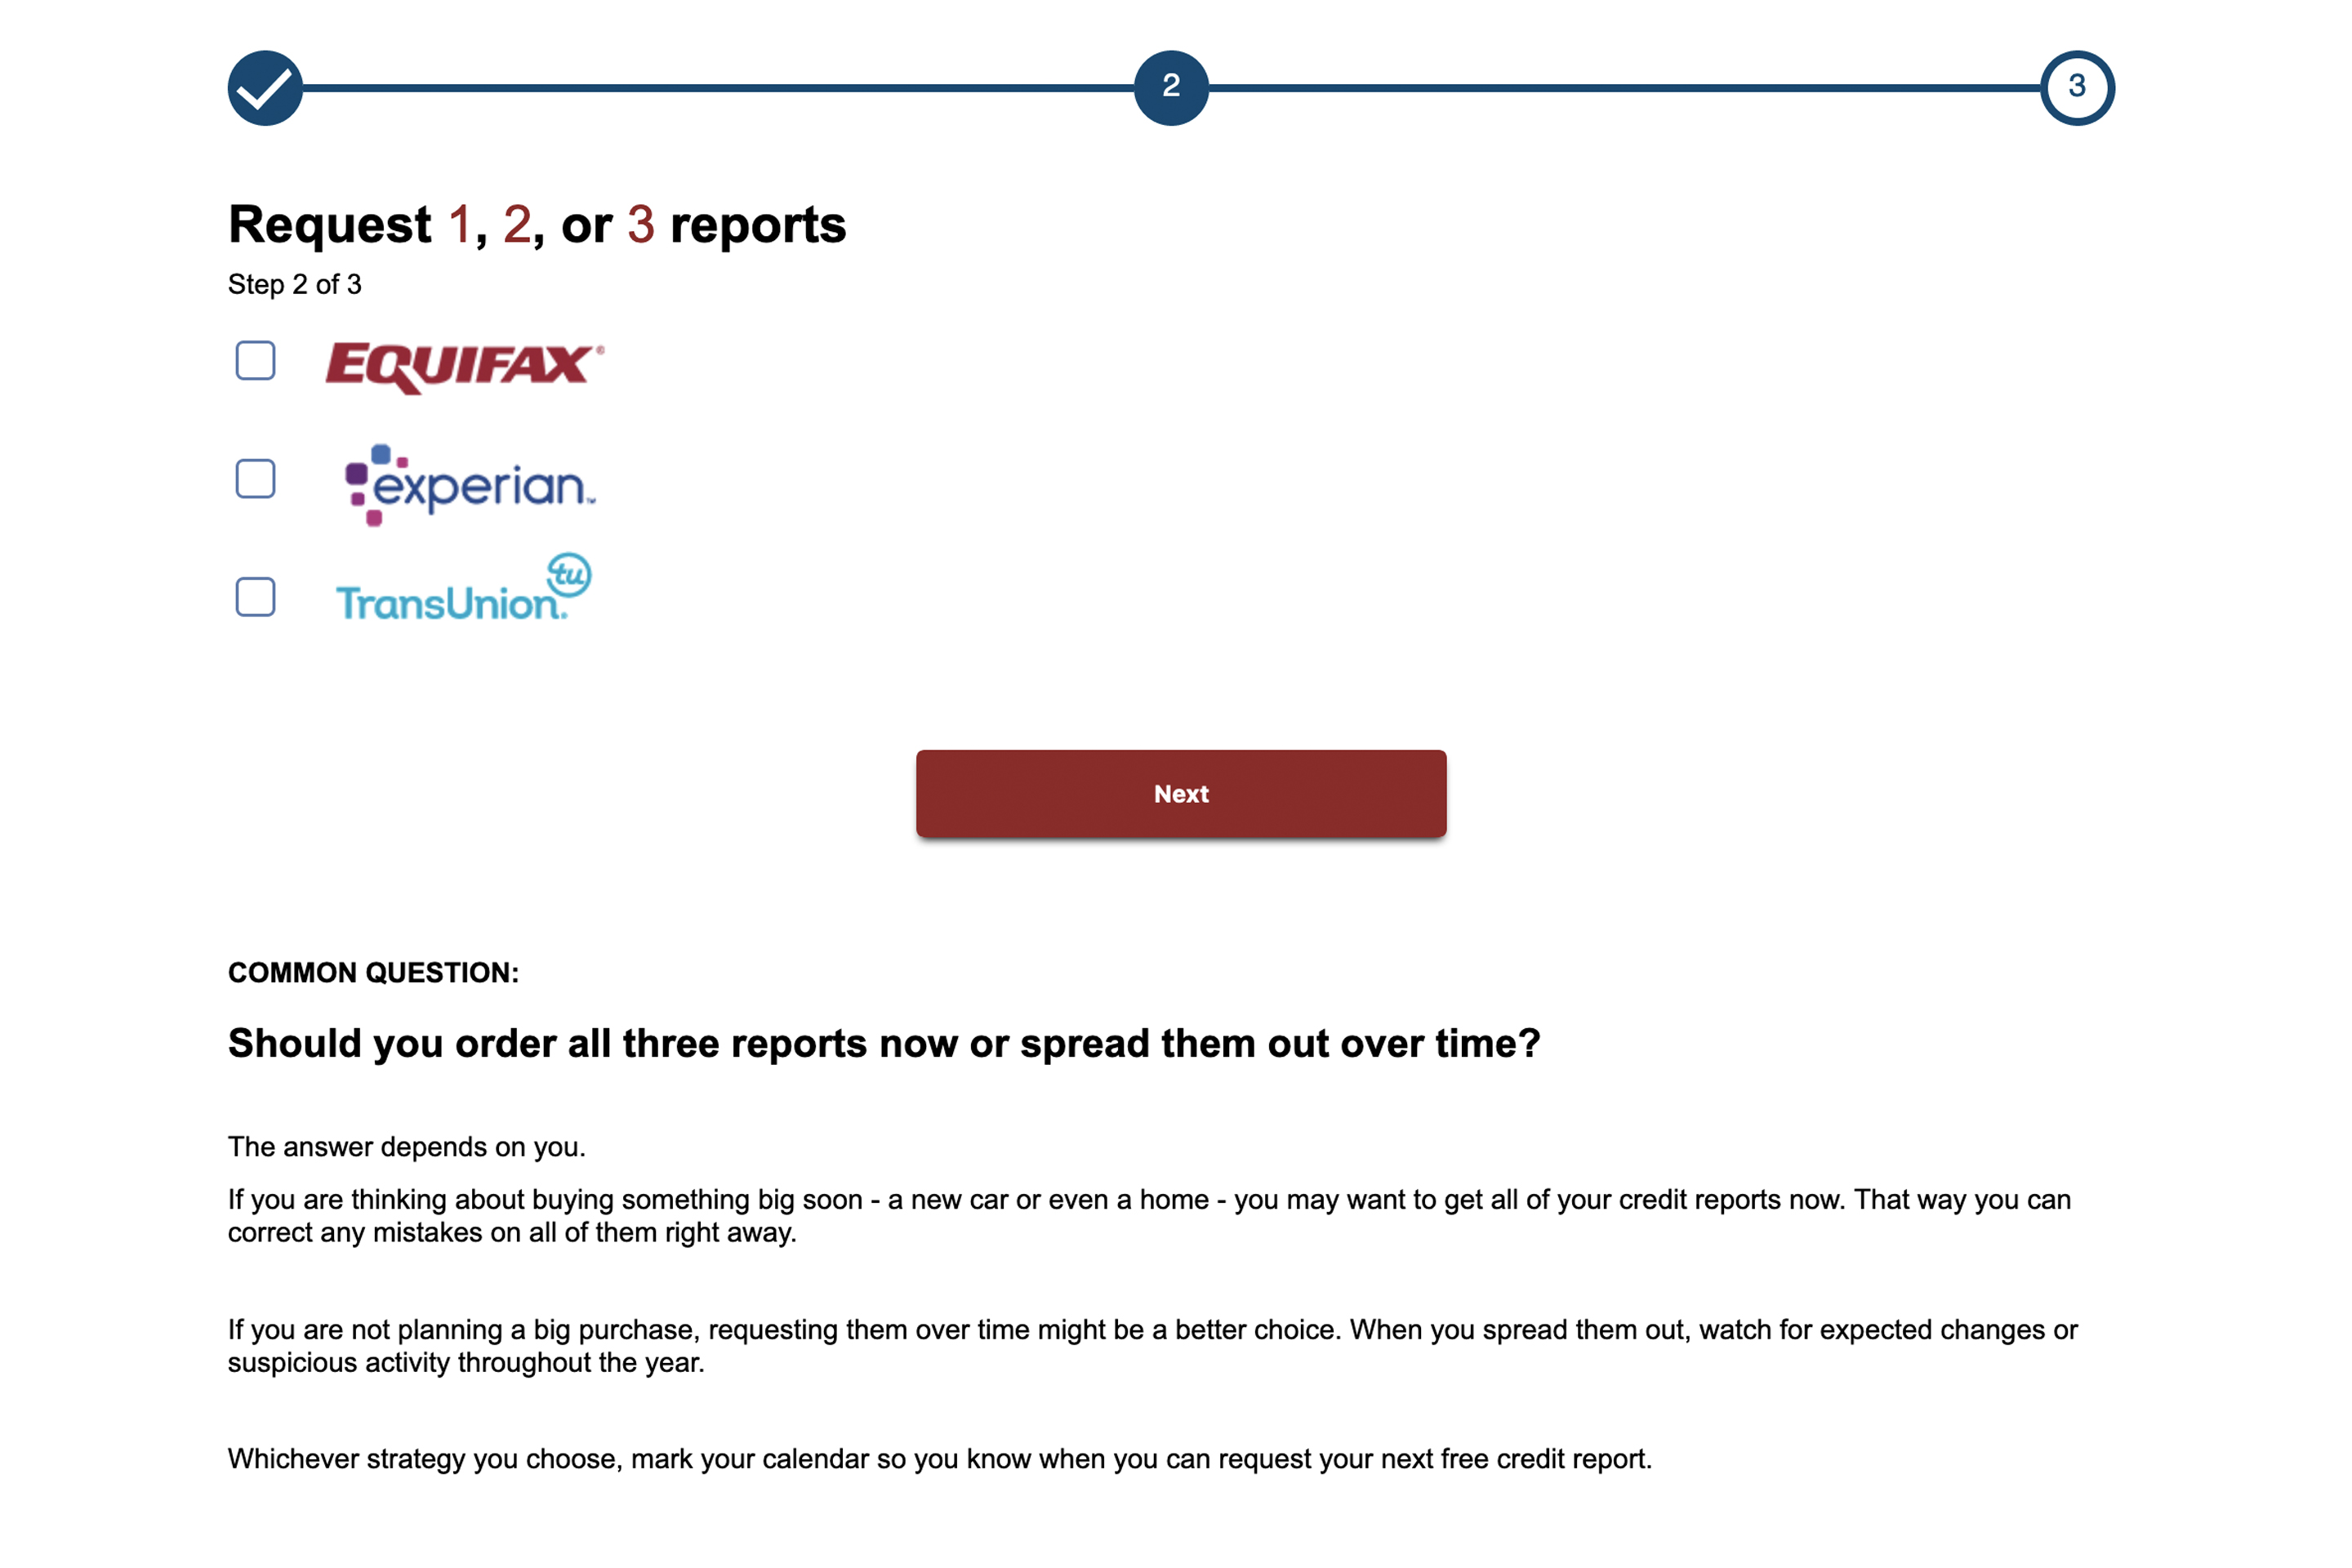 This screenshot from Annualcreditreport.com shows how users can choose to request a report from Experian, Equifax, Transunion or all three.